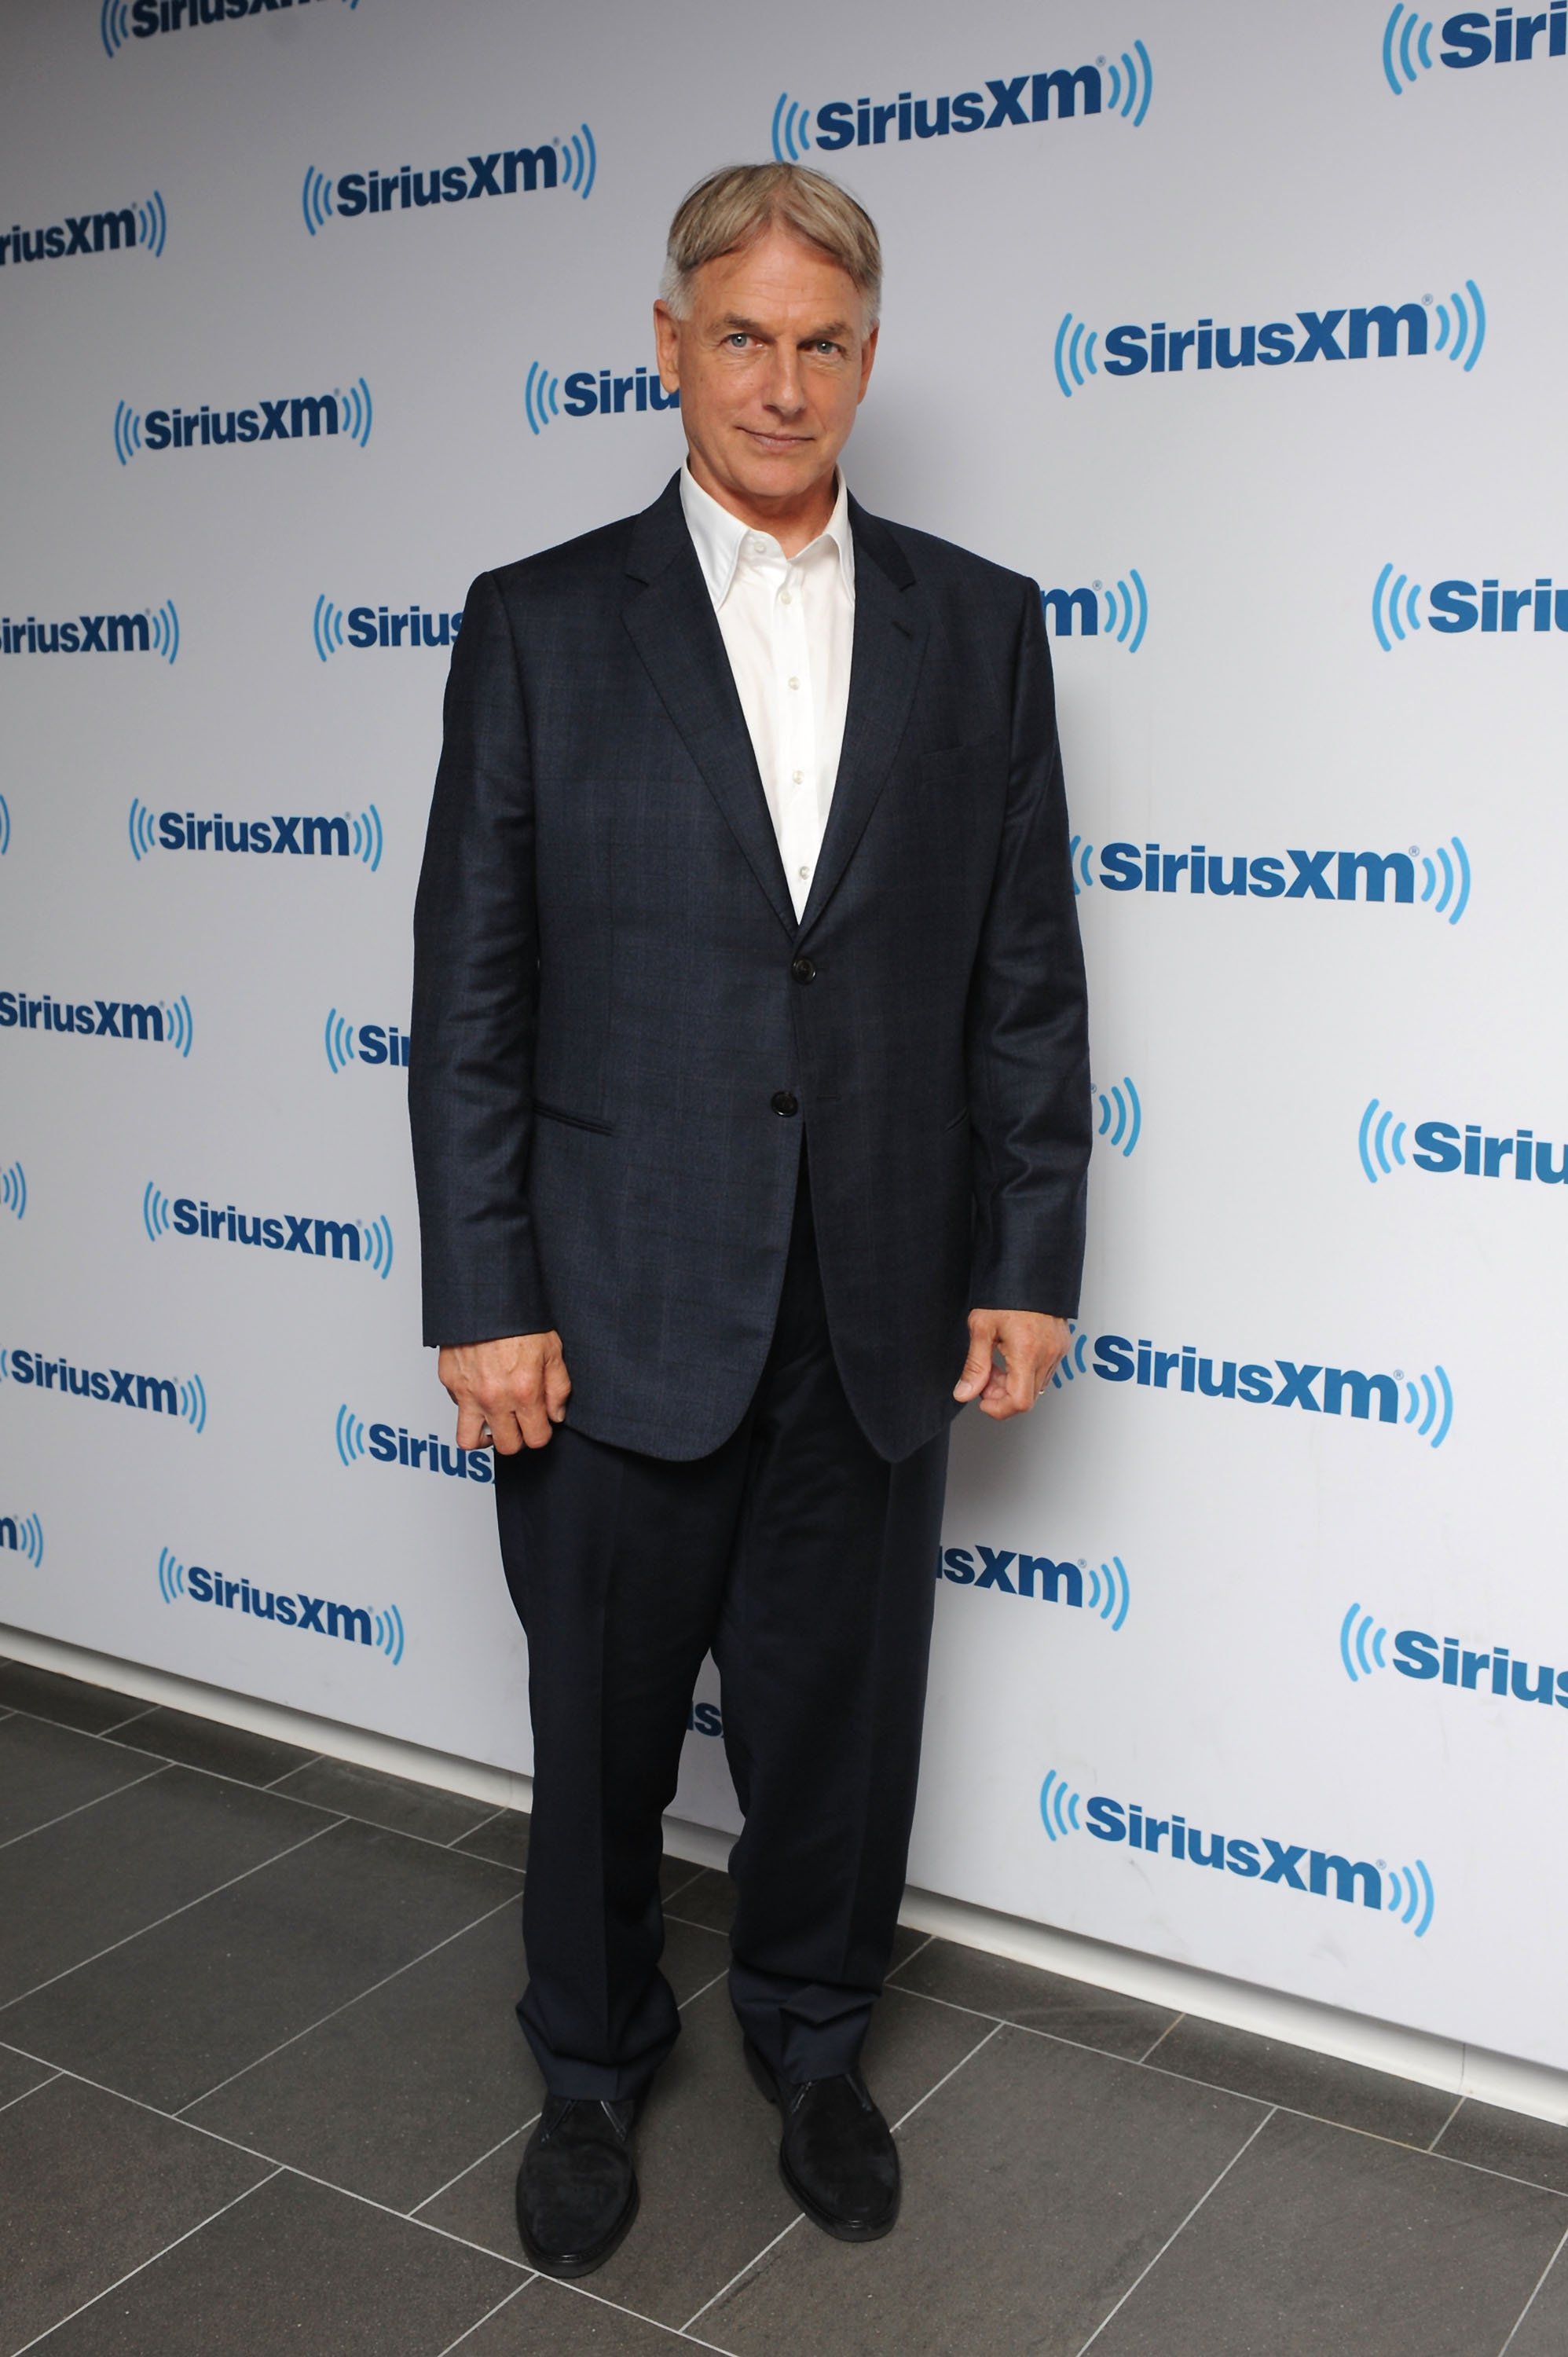 Mark Harmon bei SiriusXM Studios am 22. September 2014 in New York City | Quelle: Getty Images